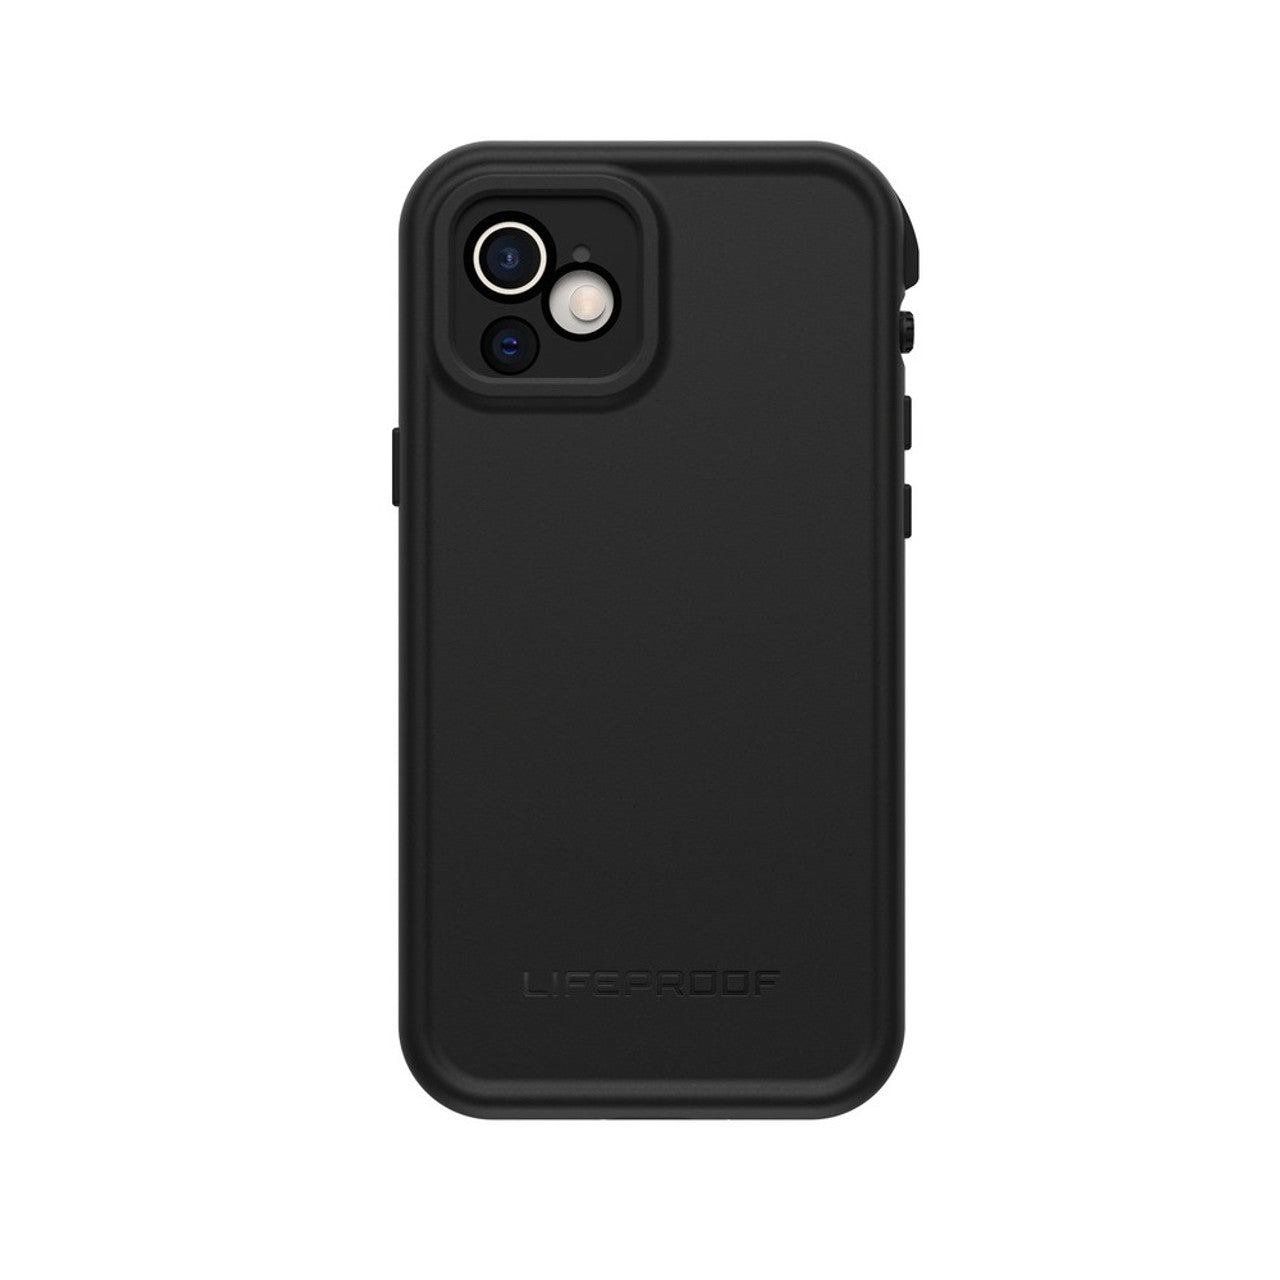 LIFEPROOF FRE CASE FOR IPHONE  12 PRO BLACK - NEW